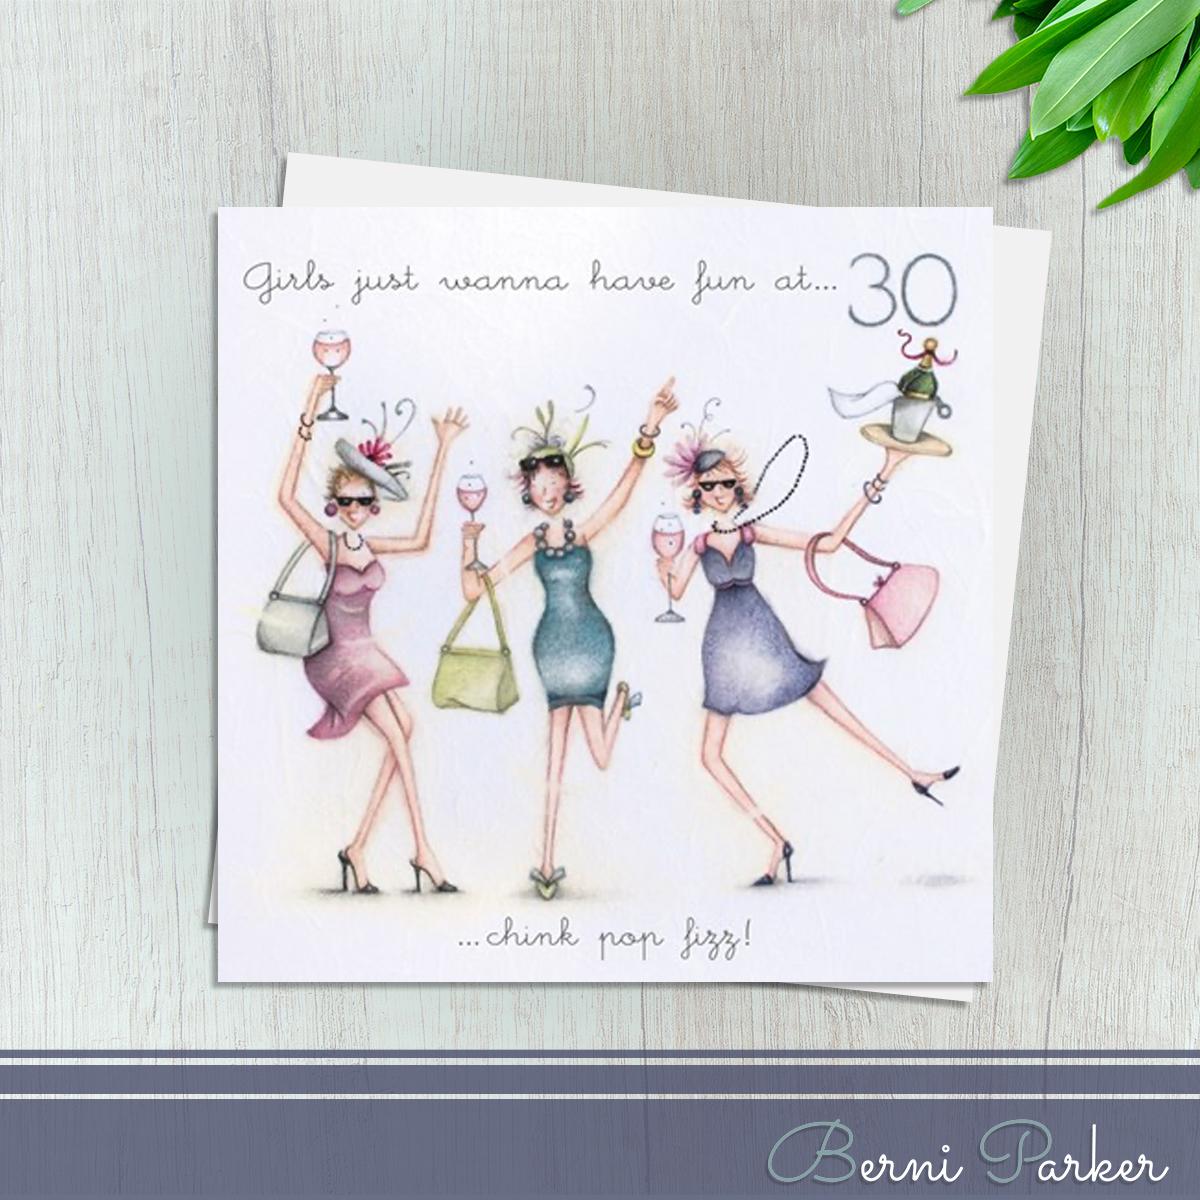 Three Girls Partying With Glasses Of Wine, Handbags And Swinging Beads. Caption: Girls Just Wanna have Fun At 30 Chink Pop Fizz! Blank Inside For Your Own Message. Complete With White Envelope